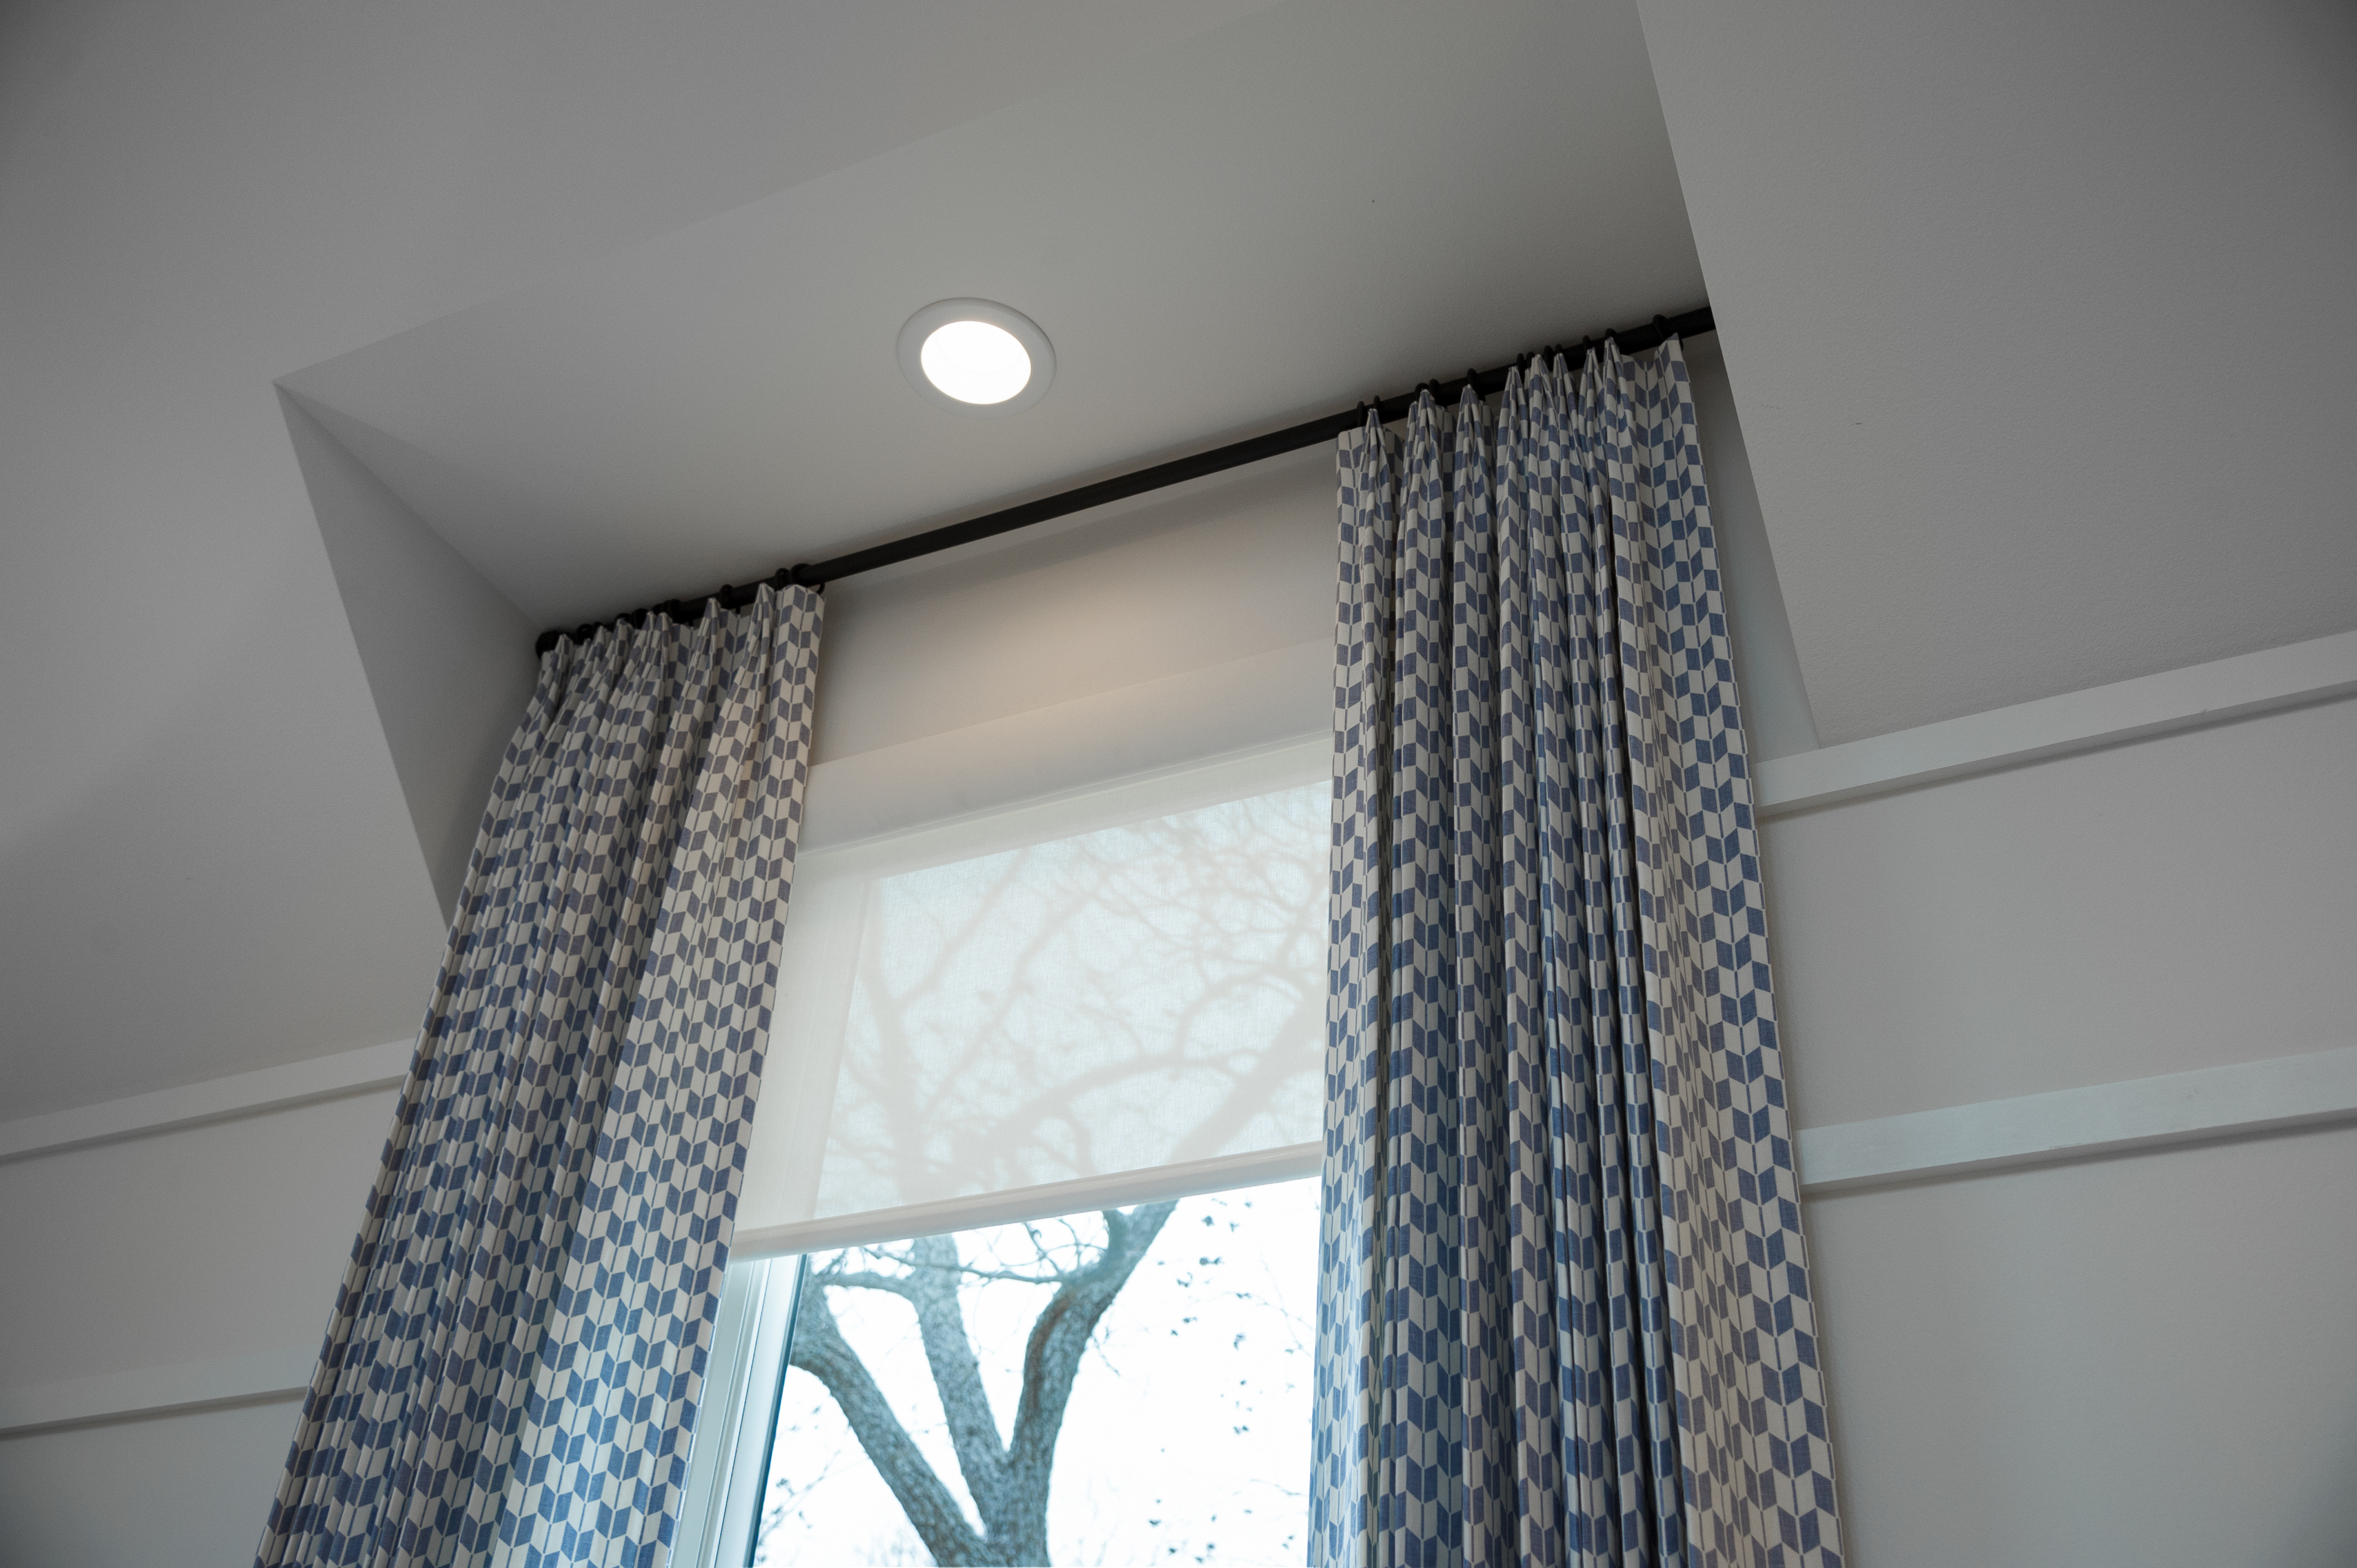 cream and light blue curtains